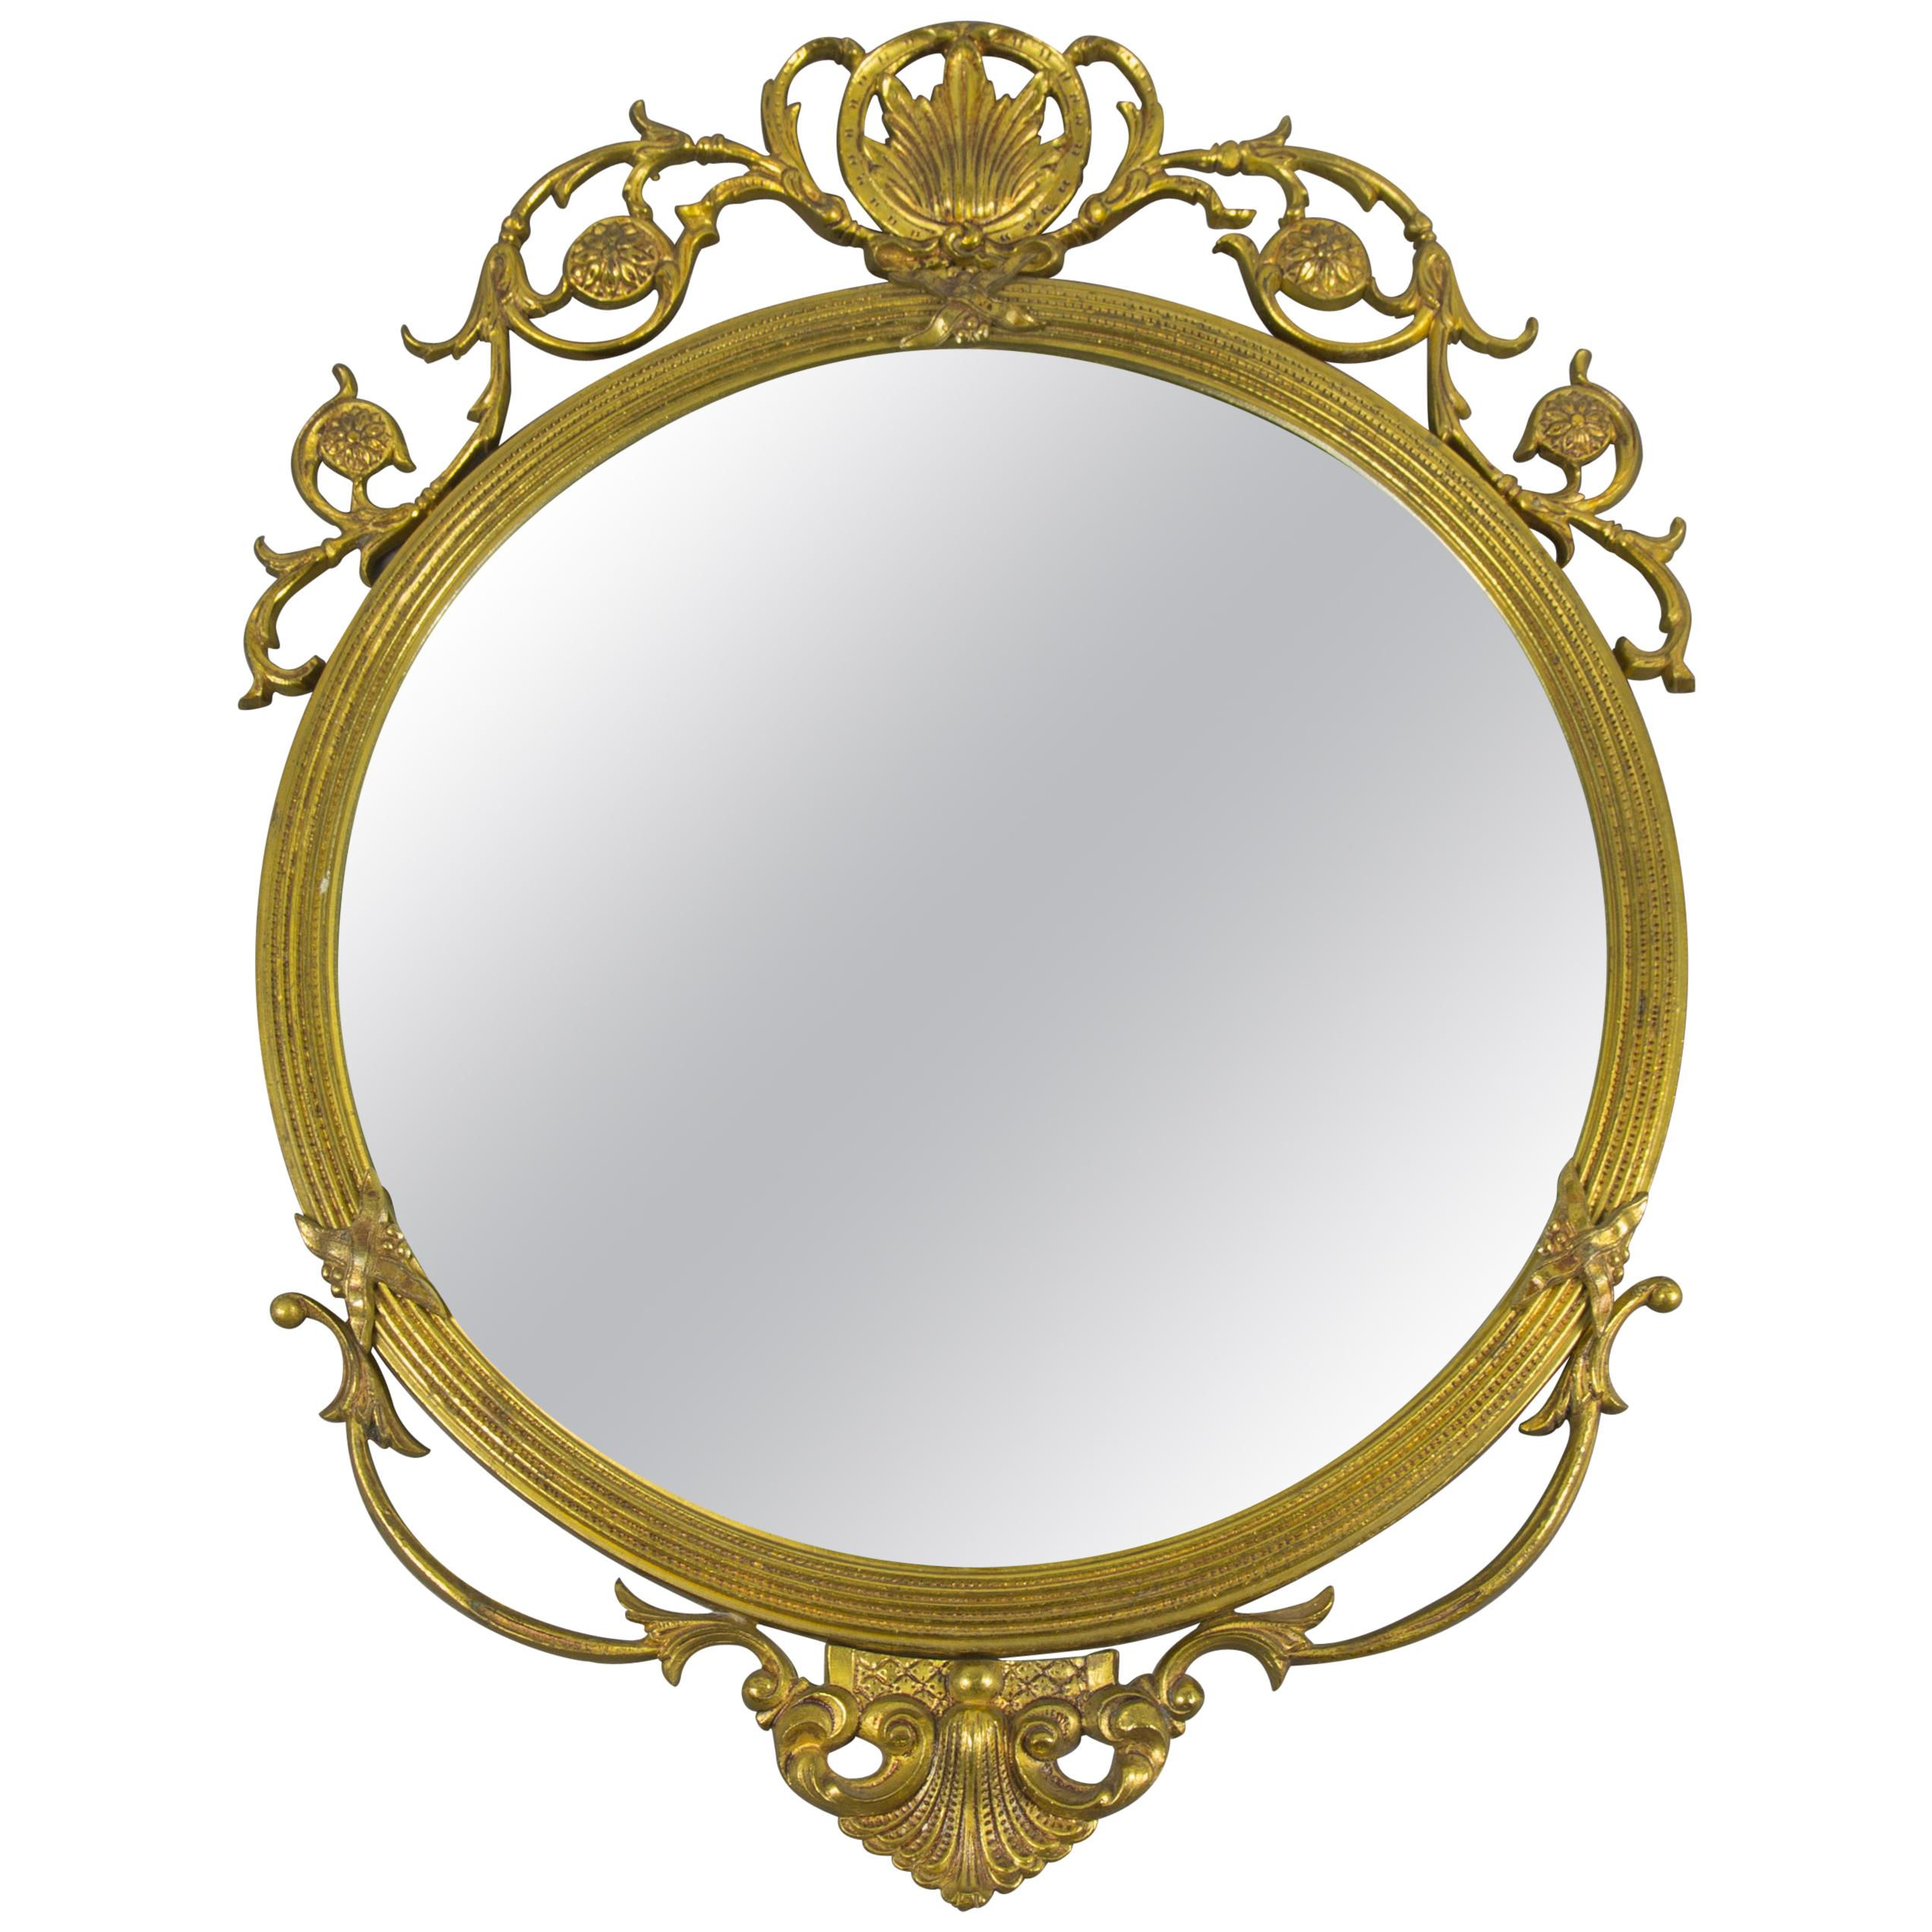 Neoclassical Style Round Wall Mirror in Bronze